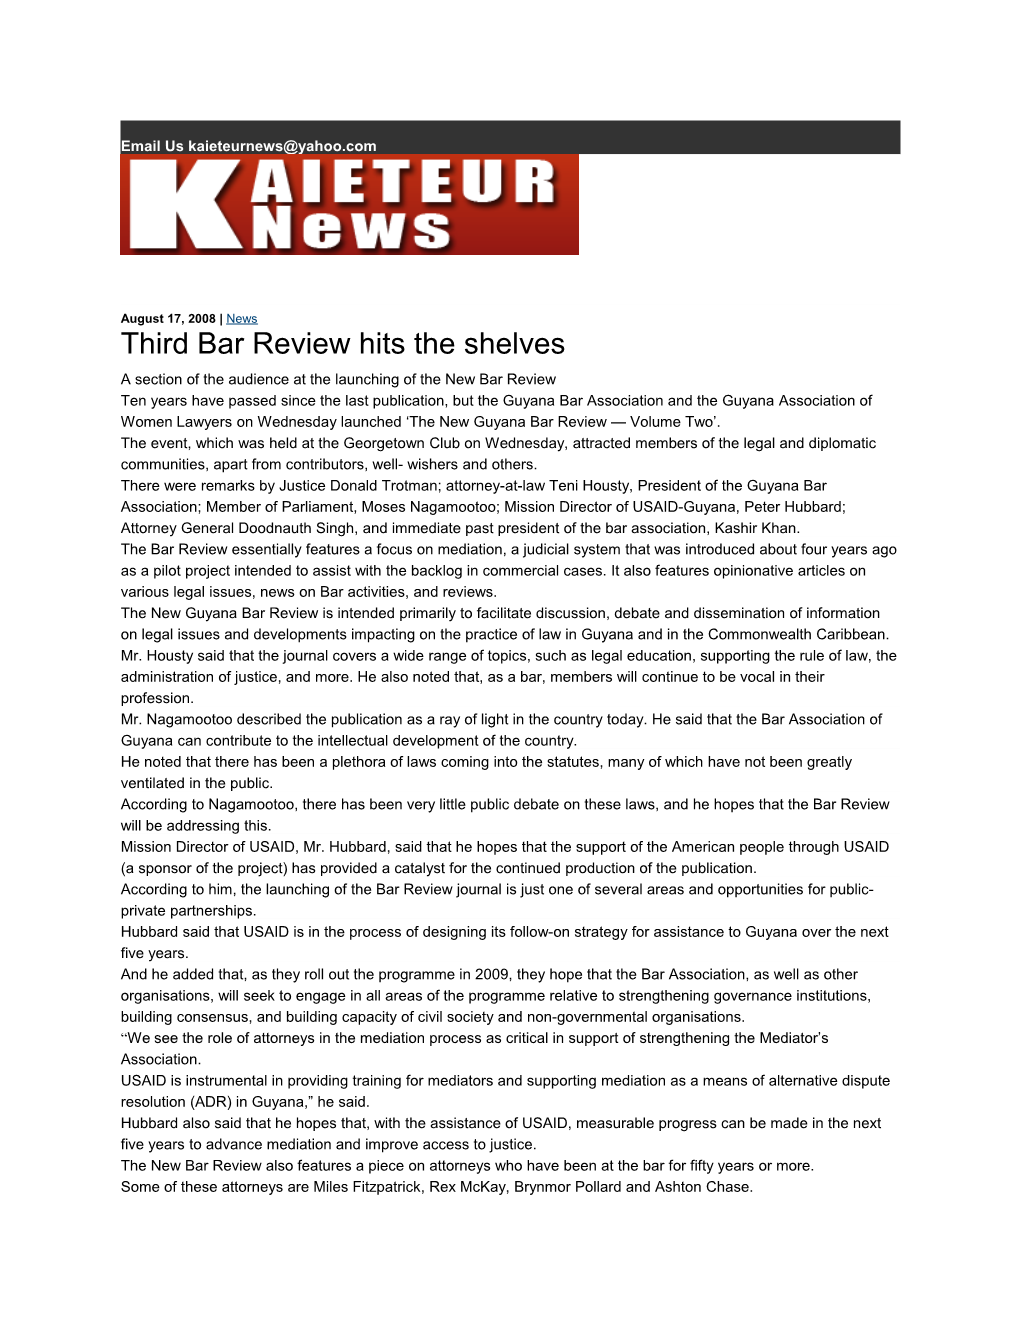 Third Bar Review Hits the Shelves